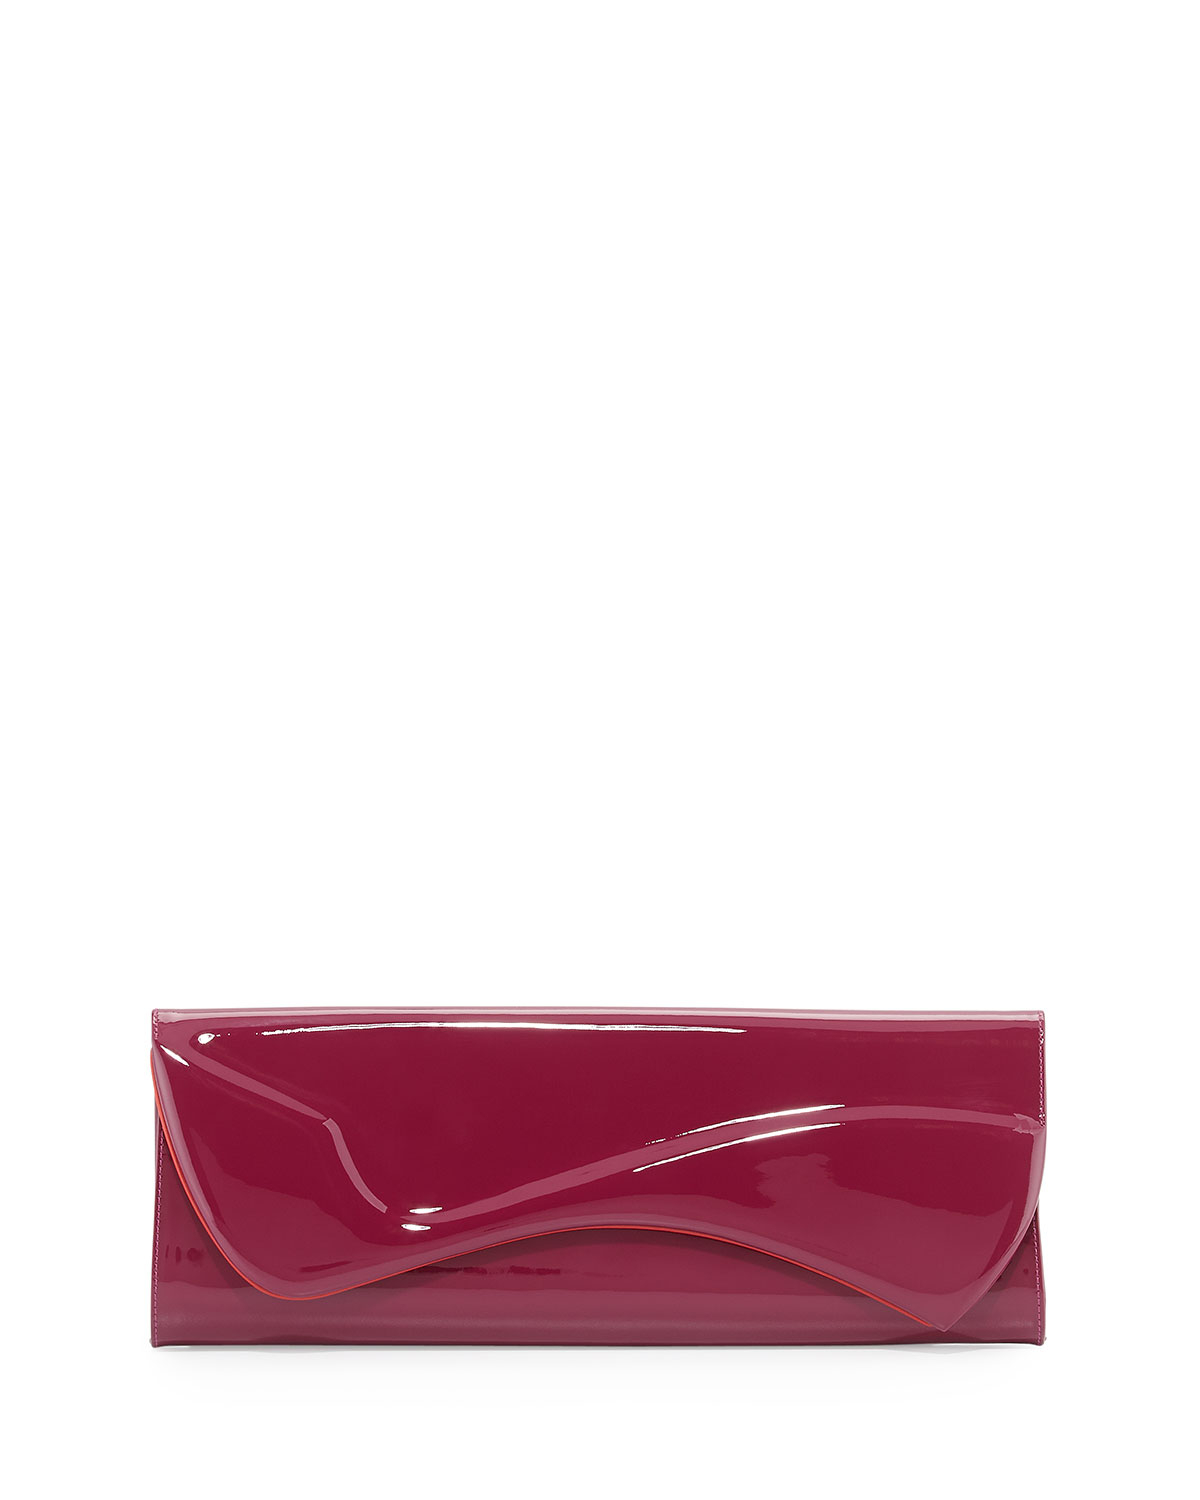 purple christian louboutin clutch bags - Catholic Commission for ...